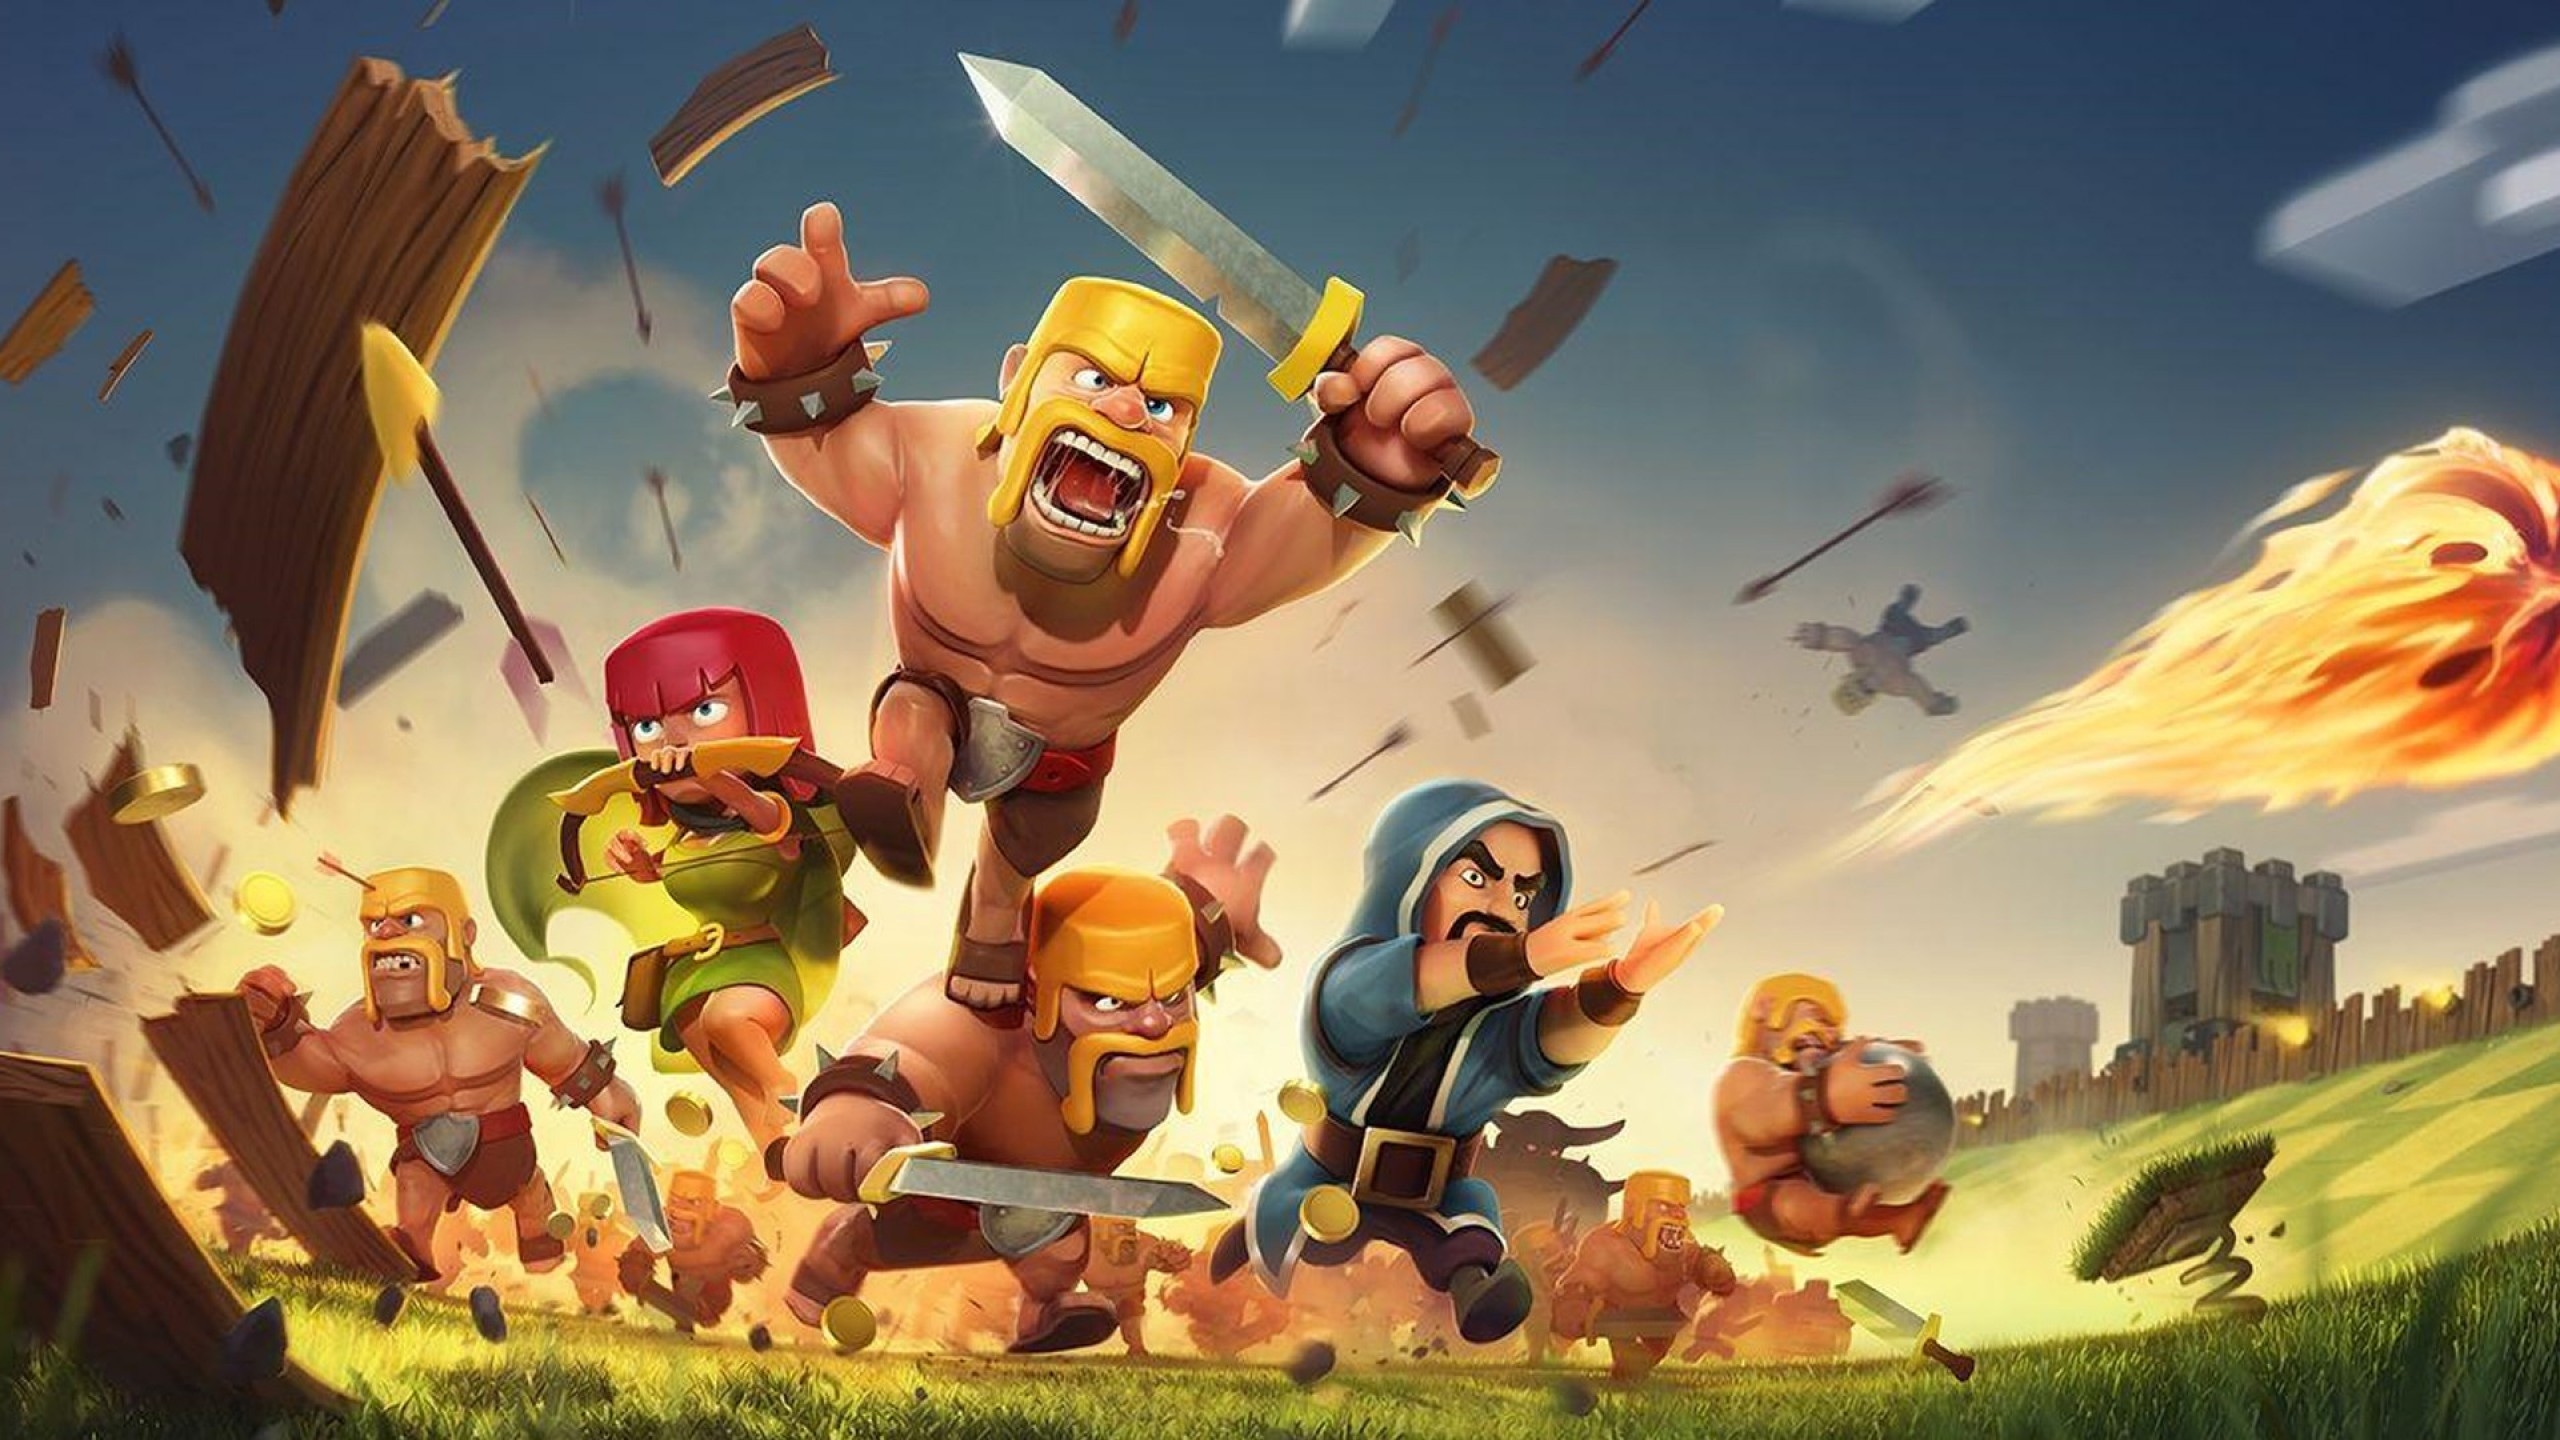 Clash of clans cover image